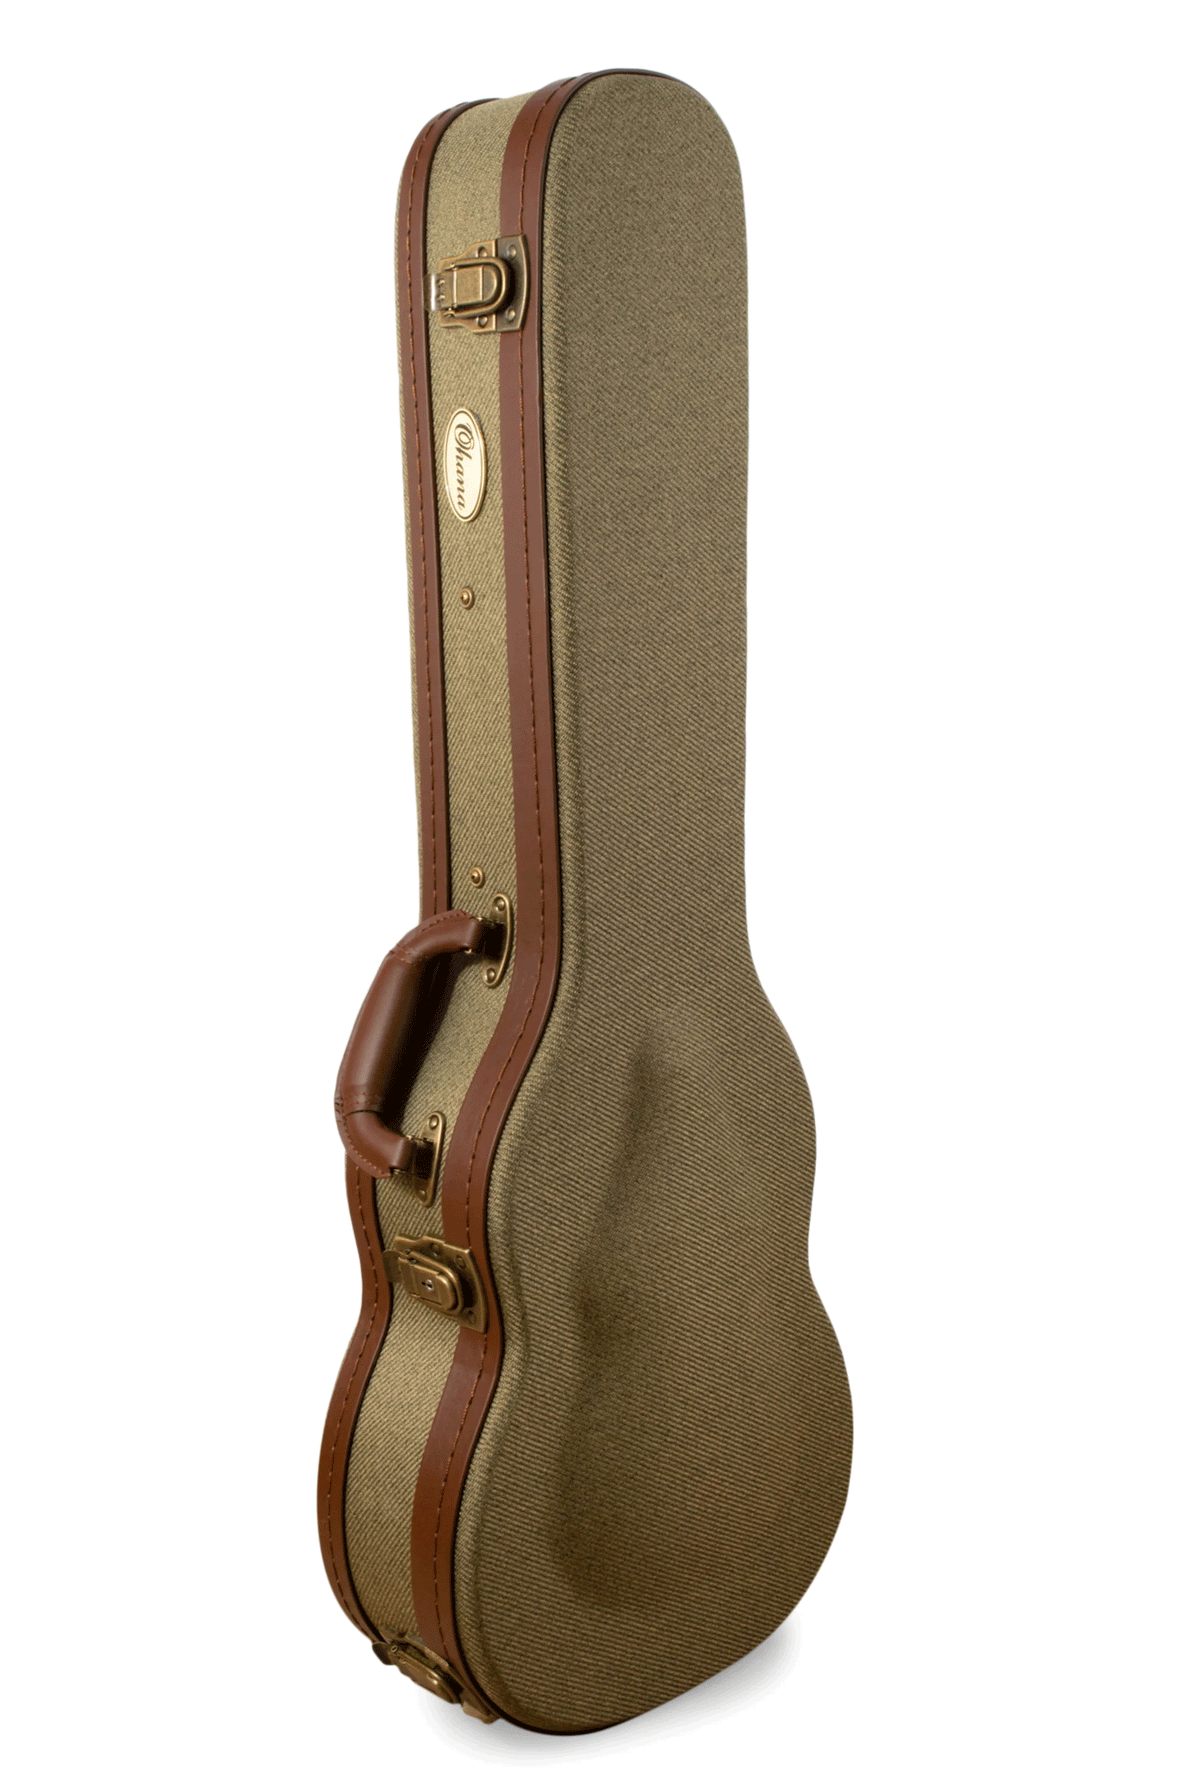 Ohana Hardcase UOT-24 Concert Ukulele Case Durable Olive Twill Fabric Arched Top Design for Extra Instrument Protection Brown Tolex Trim with Sewn Stitching and Matching Handle Antique Bronze Drawbolt Case Latches Antique Bronze Side and Bottom Stops for Extra Stability &amp; Protection Padded Plush Interior Velvet in Wine Color Interior Heel Rest with Storage Compartment Ukulele Trading Co Australia